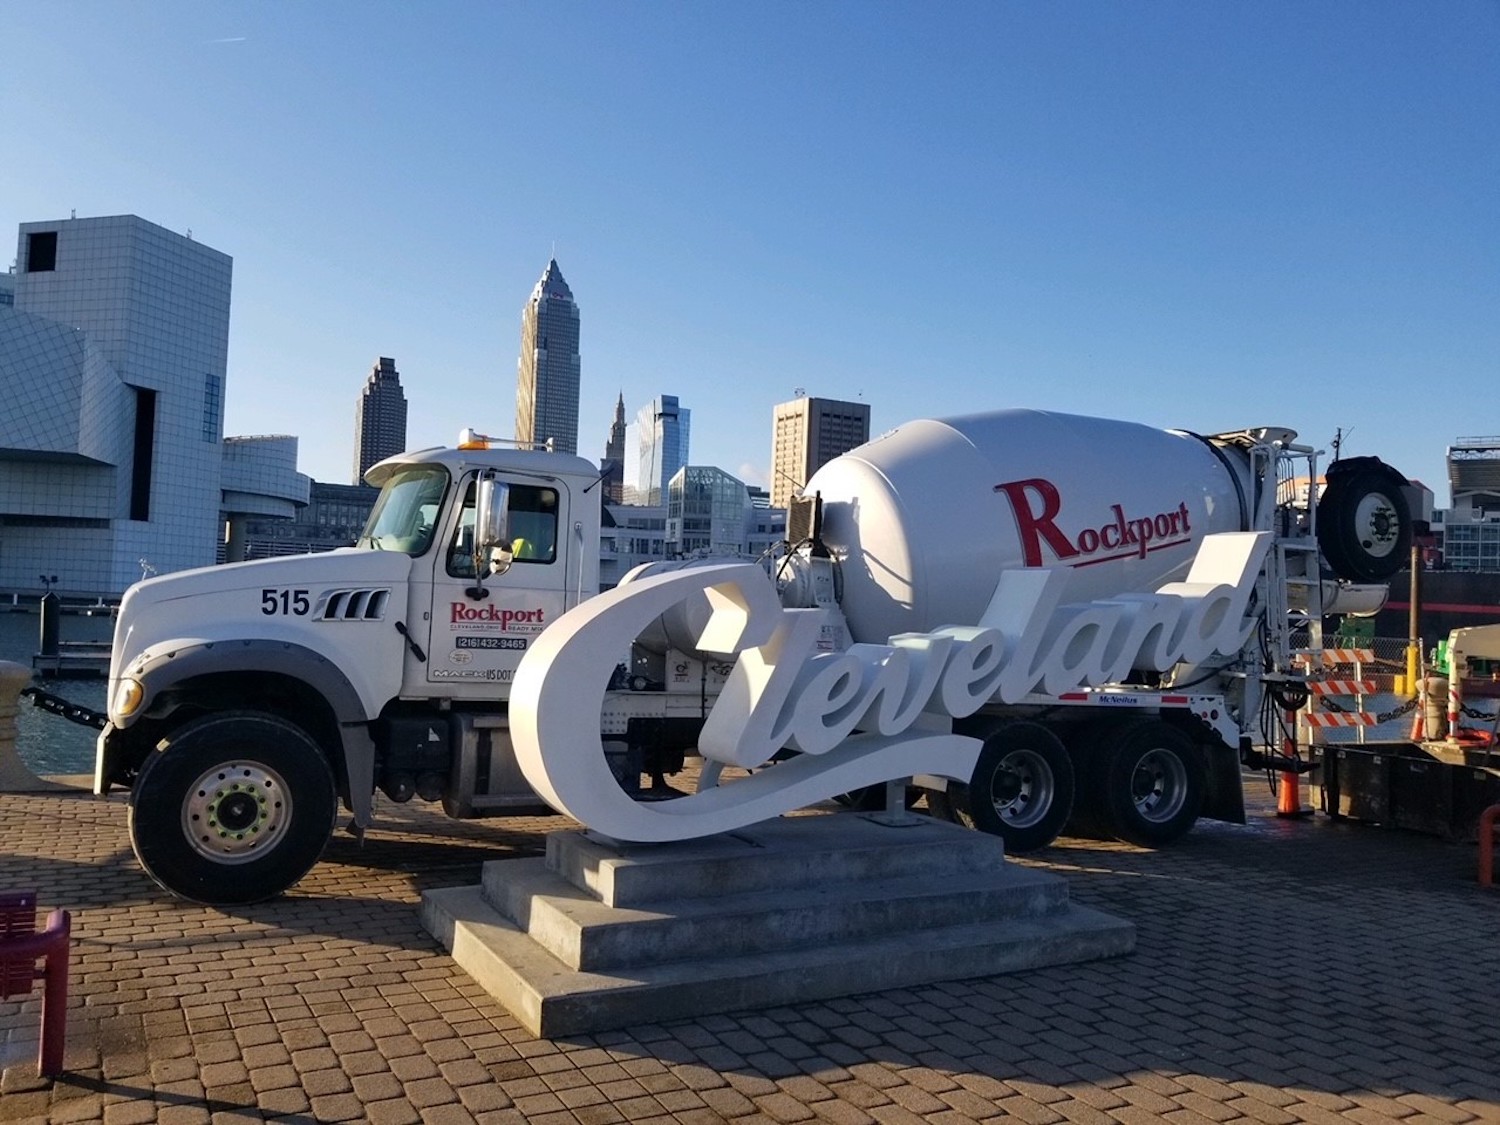 Concrete truck is parked behind white "Cleveland" logo mounted on concrete. Both are in front of city skyline.